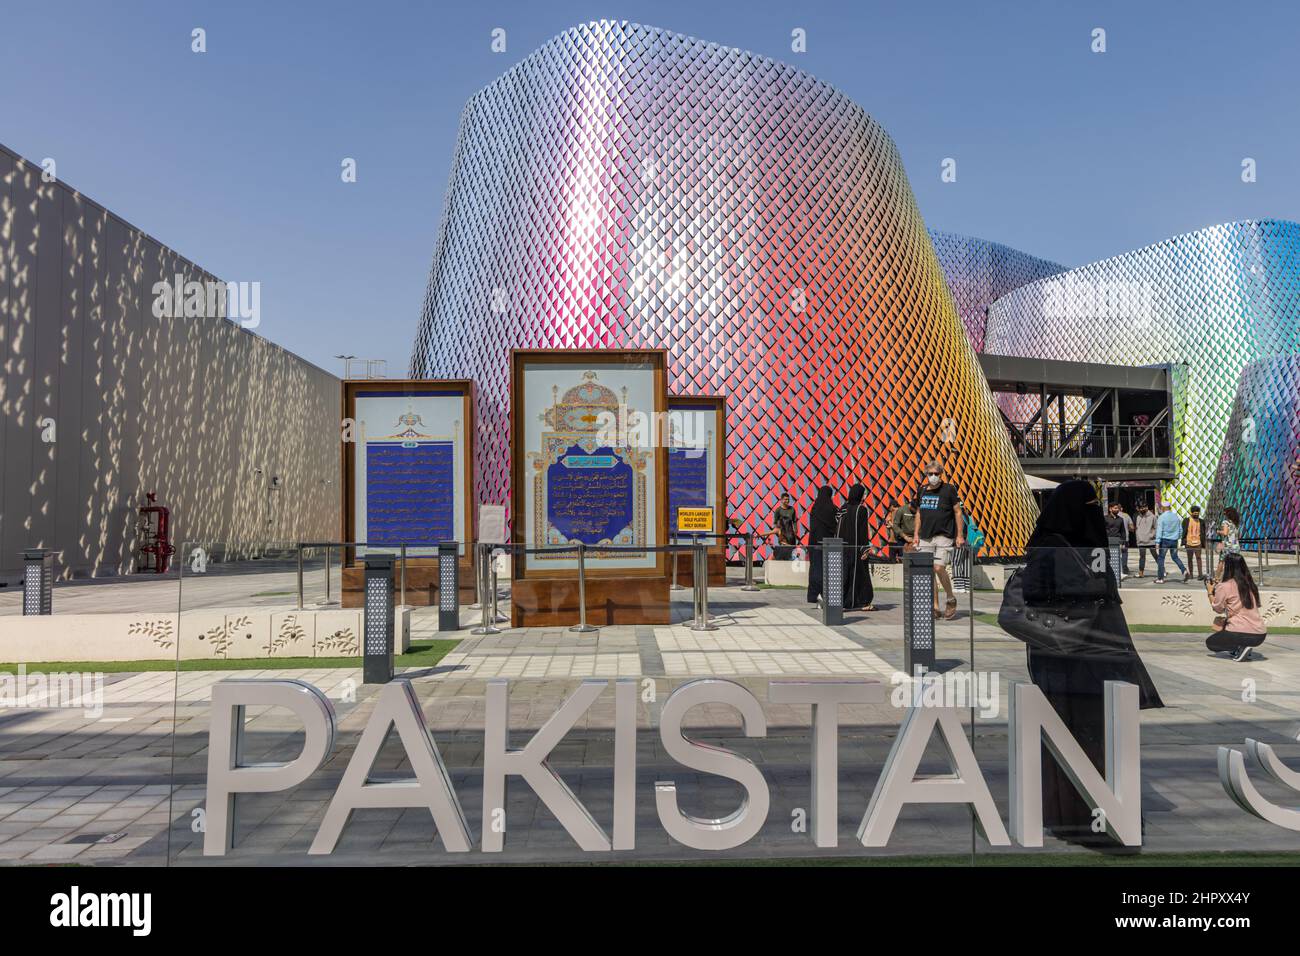 Beautiful and colorful facade of the Pakistan Pavilion in the Opportunity District at the Dubai EXPO 2020 in the United Arab Emirates. Stock Photo